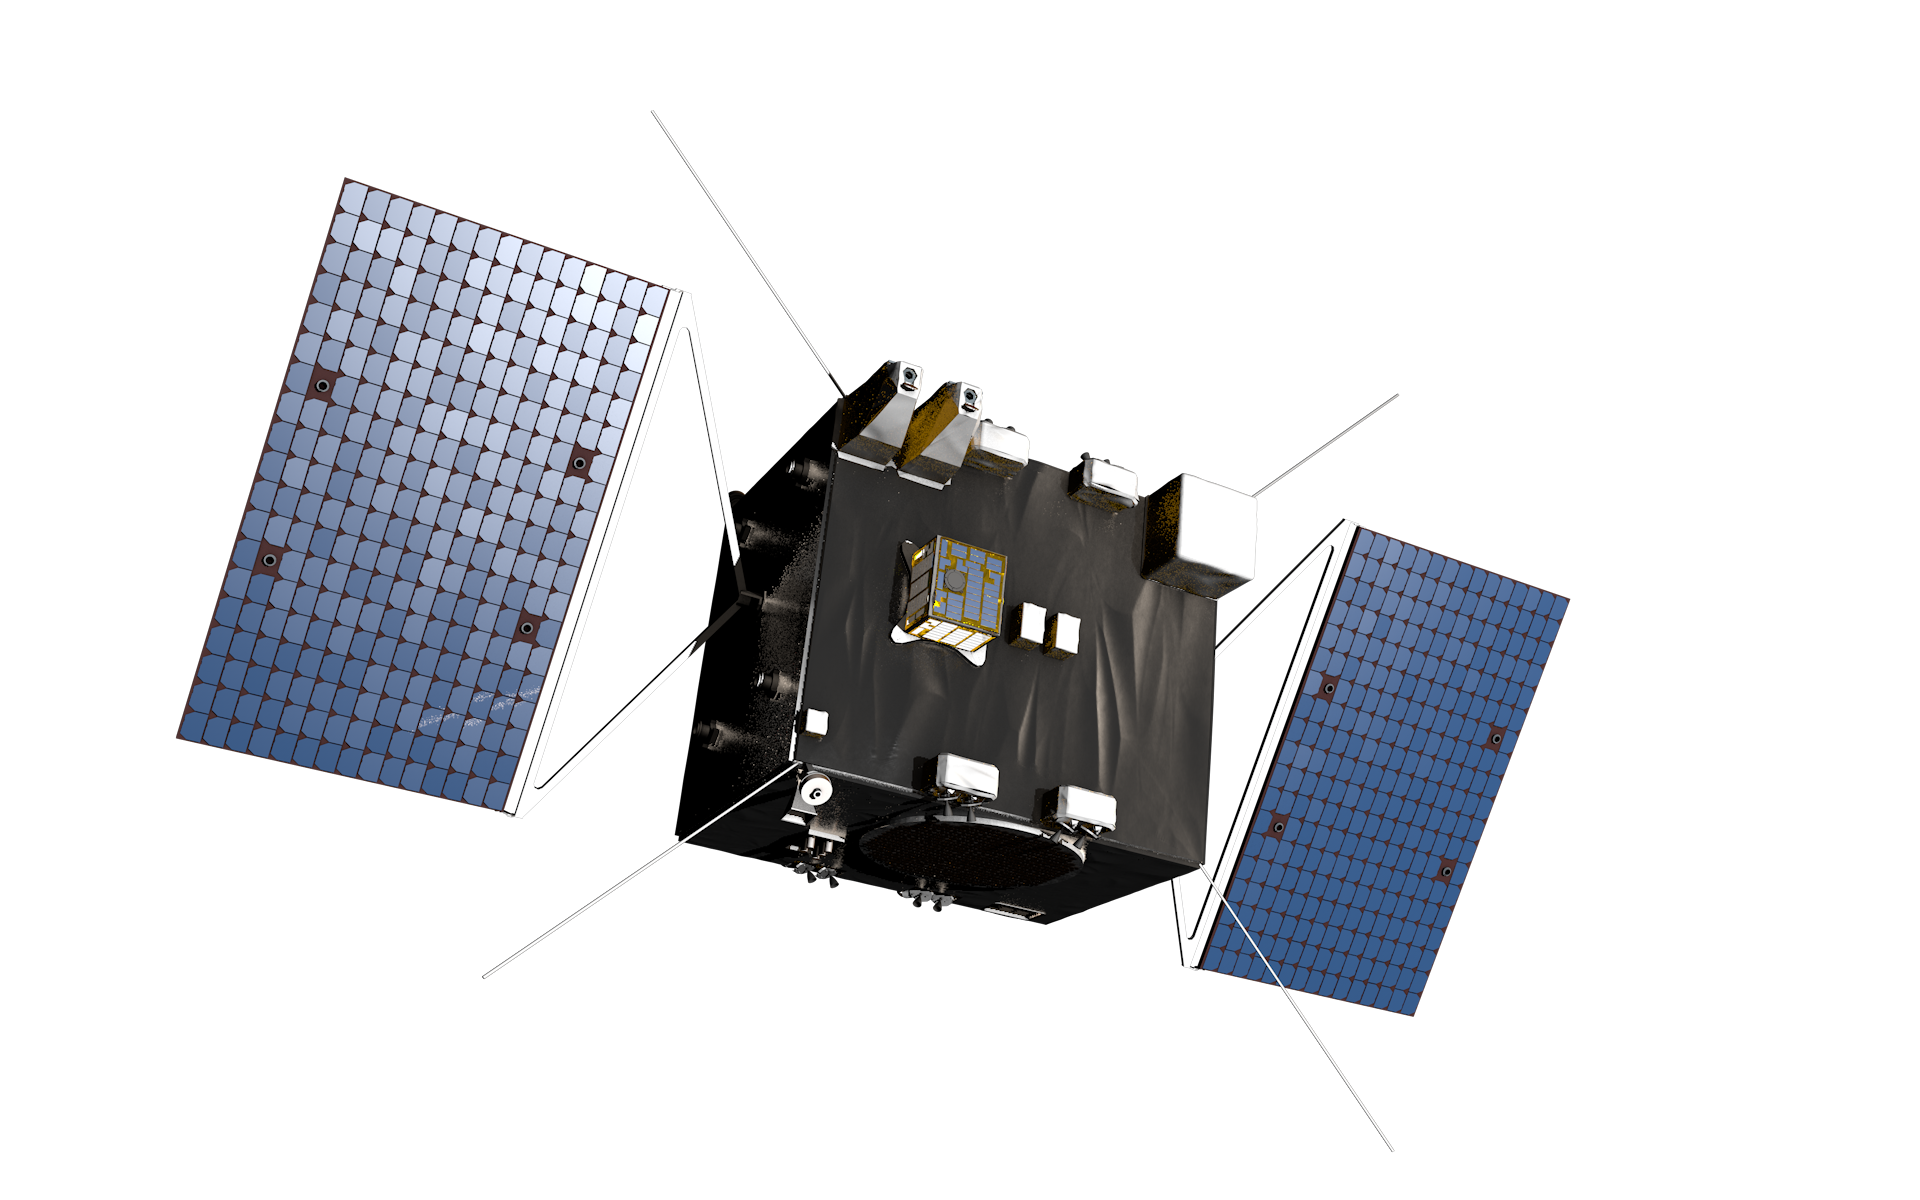 OHB proposal for AIM spacecraft - close-up 3